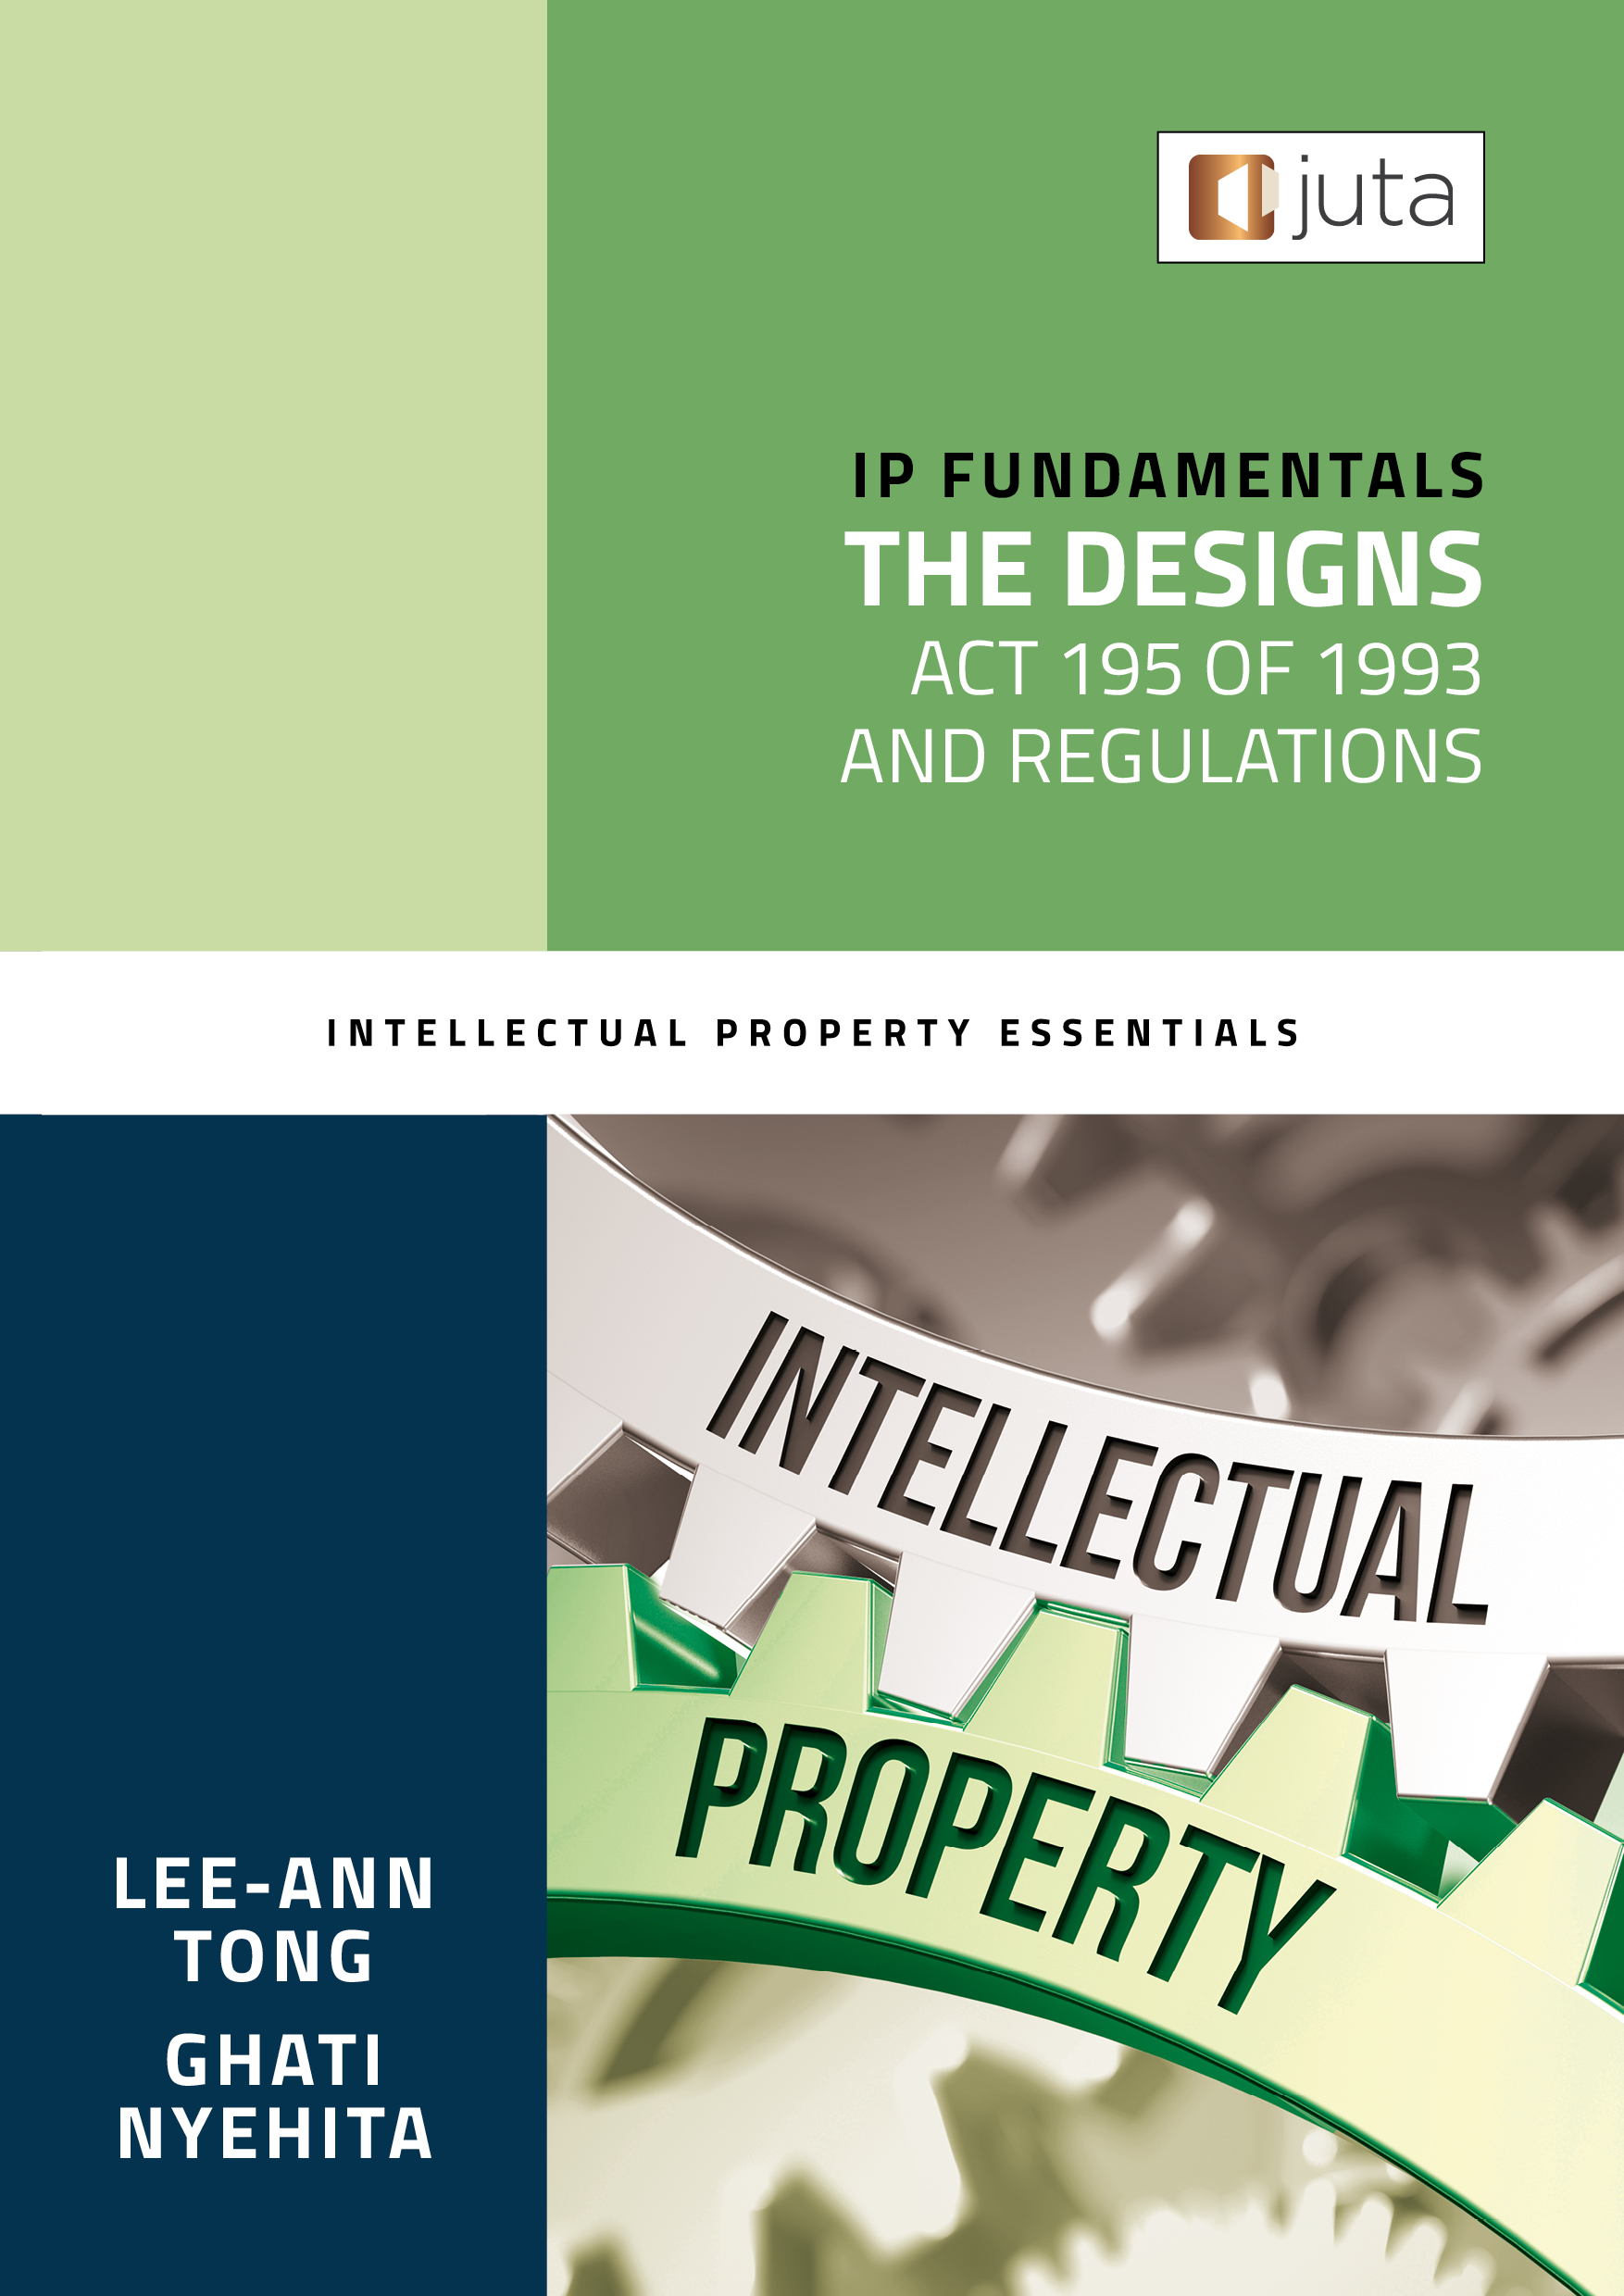 IP Fundamentals: The Designs Act 195 of 1993 and Regulations